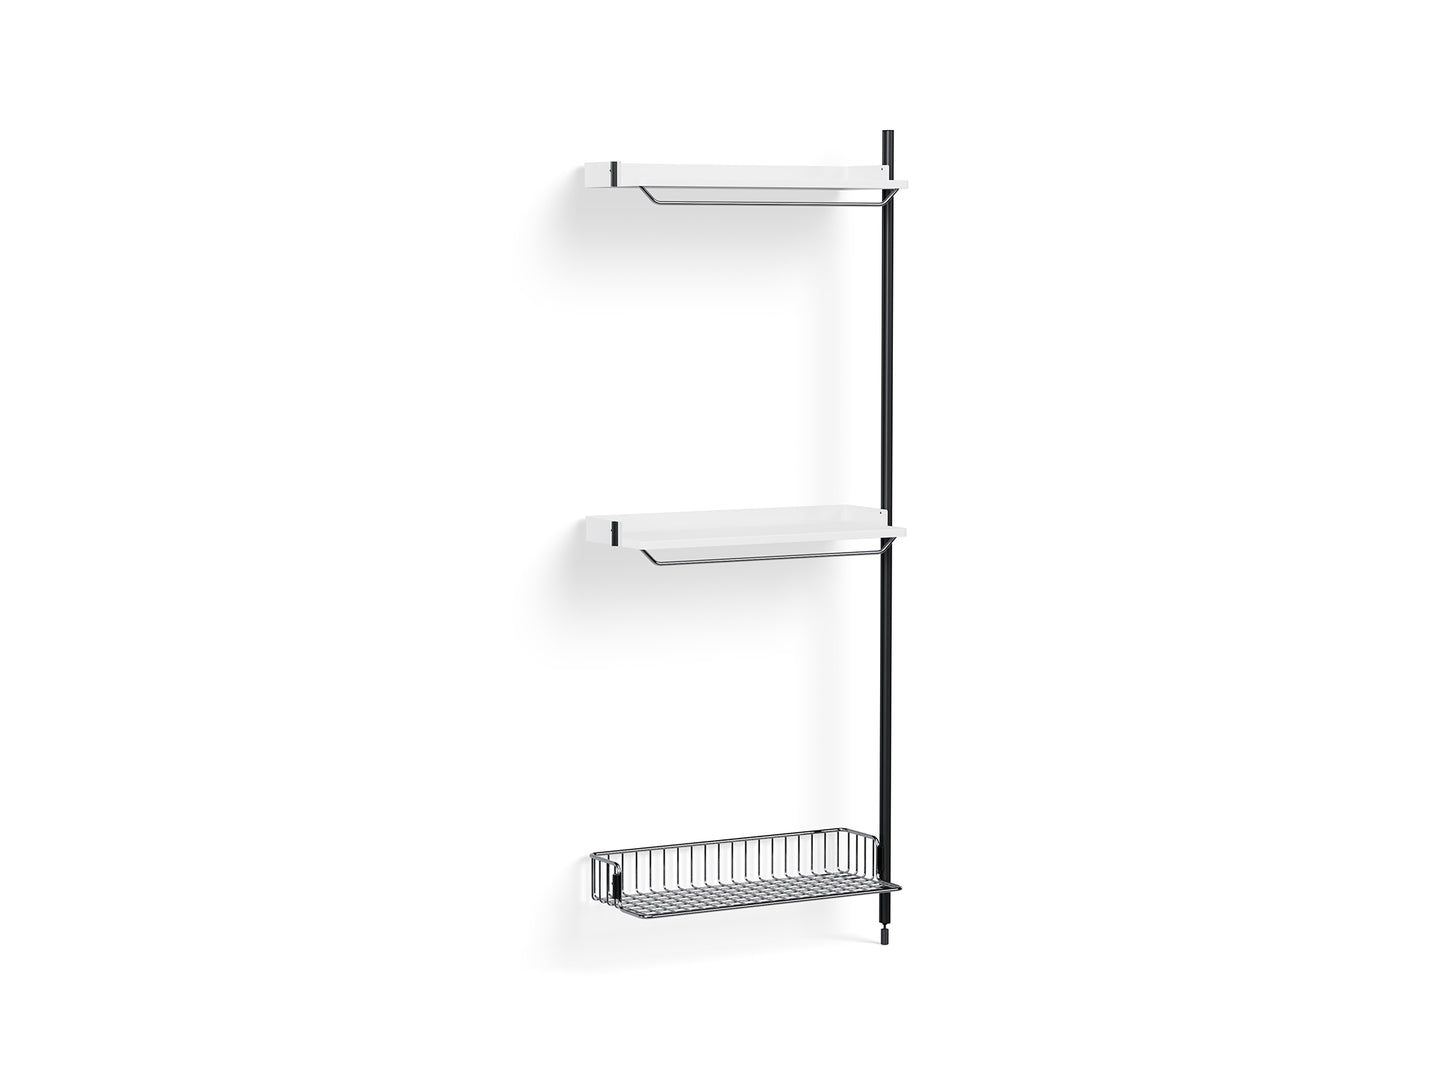 Pier System 1030 Add-ons by HAY - Black Anodised Aluminium Uprights / PS White with Chromed Wire Shelf